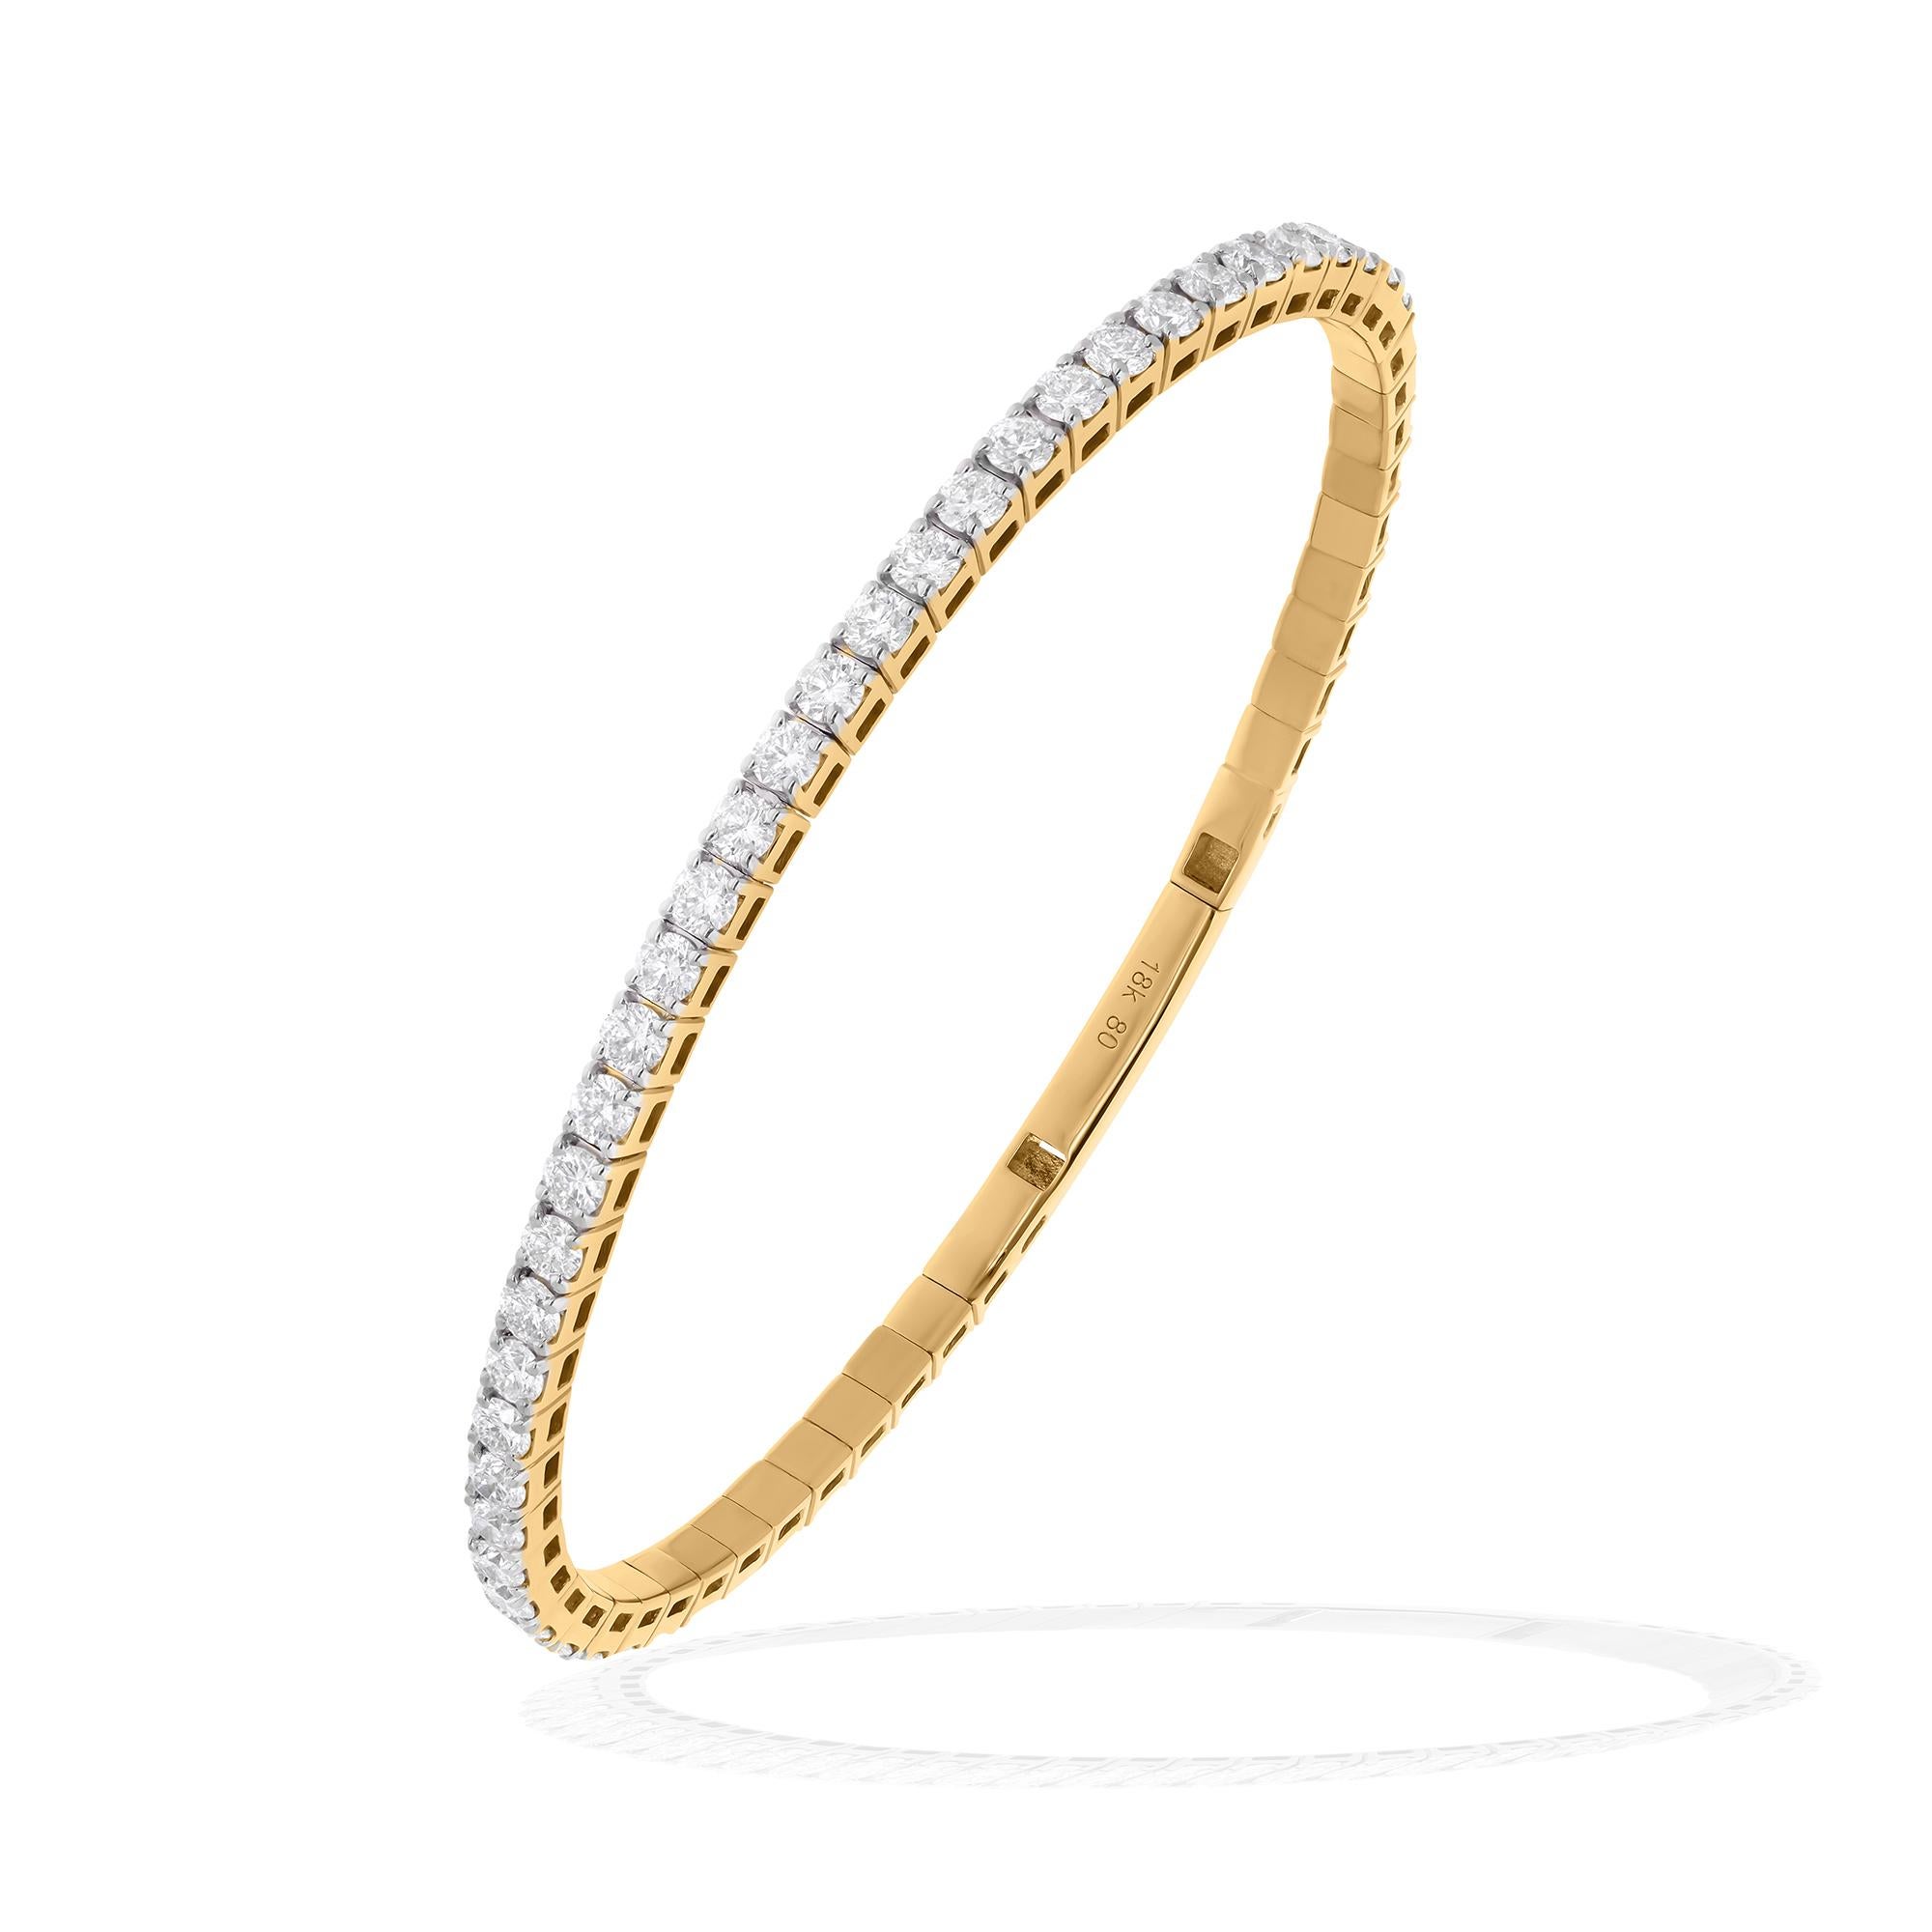 Each diamond featured in this bracelet is hand-selected for its exceptional brilliance and clarity, ensuring a dazzling display of light with every movement. The HI color grade signifies diamonds of near-colorless beauty, radiating a subtle warmth